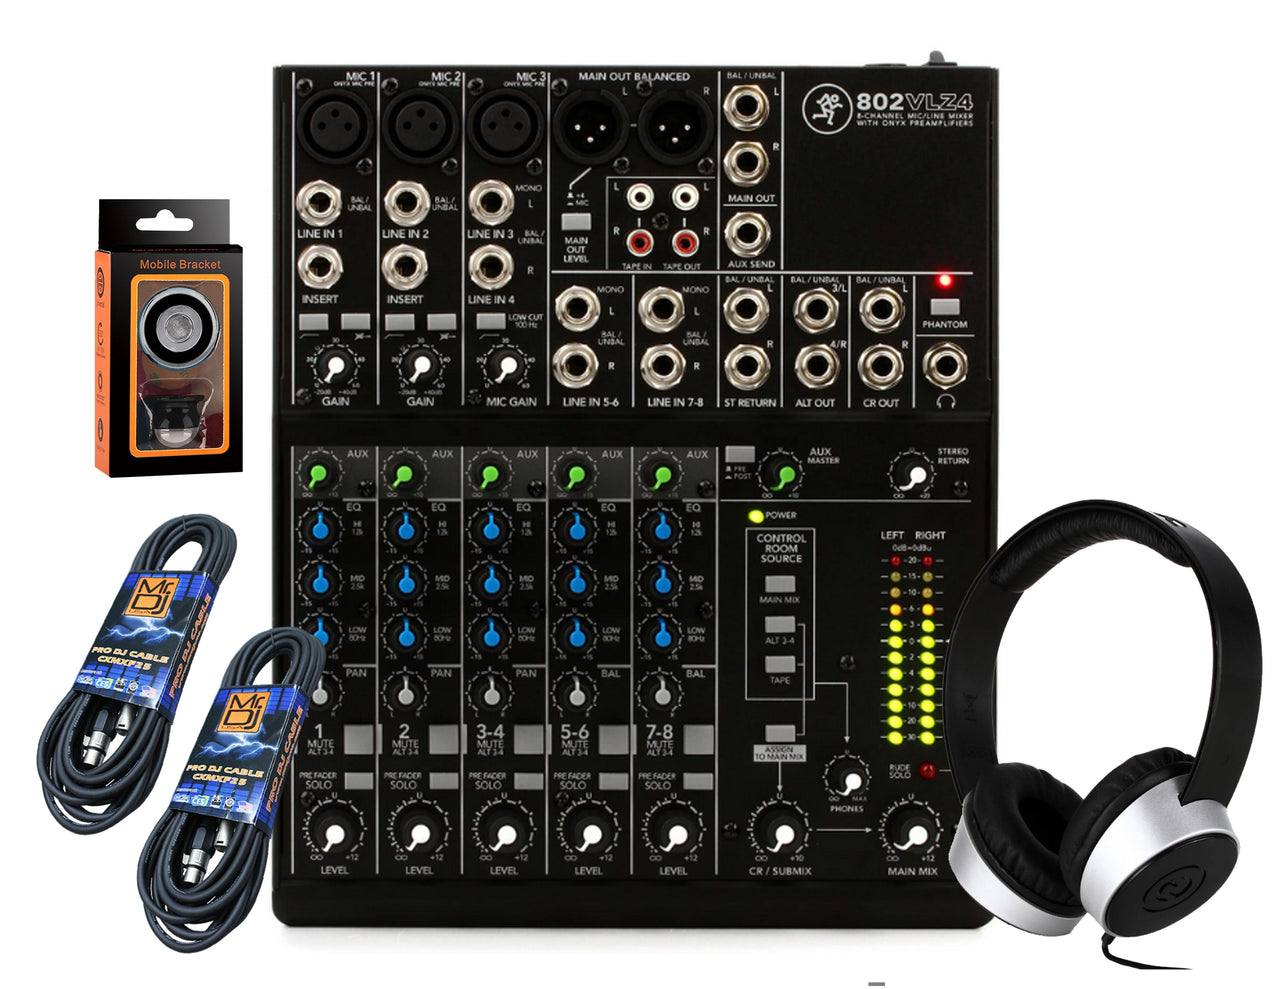 Mackie 802VLZ4 8-channel Analog Mixer + SR450 Headphone with Pair of XLR Cable+free Absolute Phone Holder